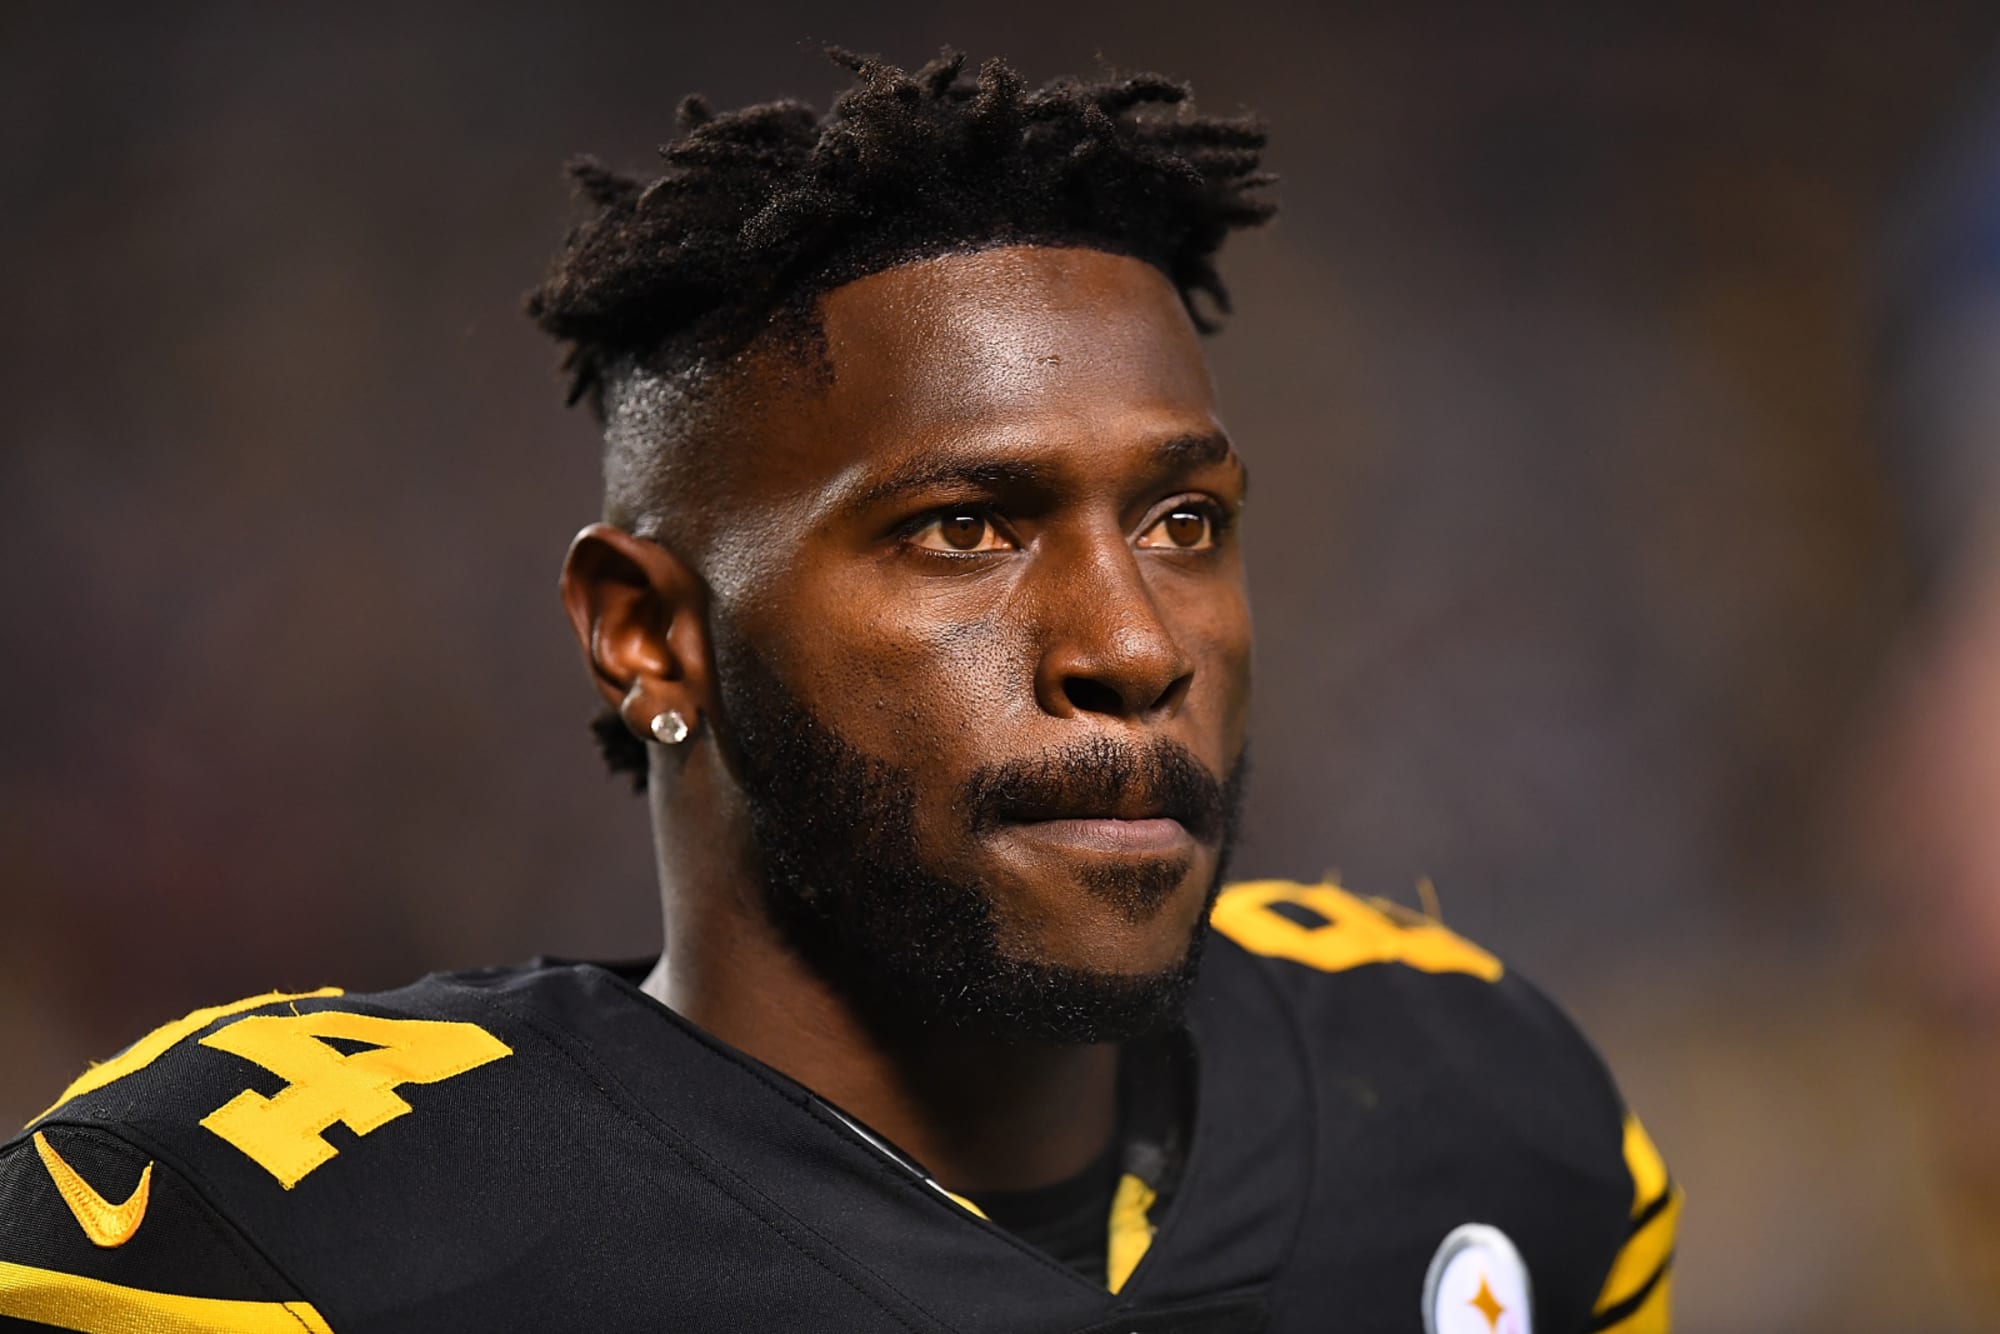 Antonio Brown returns to the NFL this week. Here’s what to expect from him in his debut. thumbnail